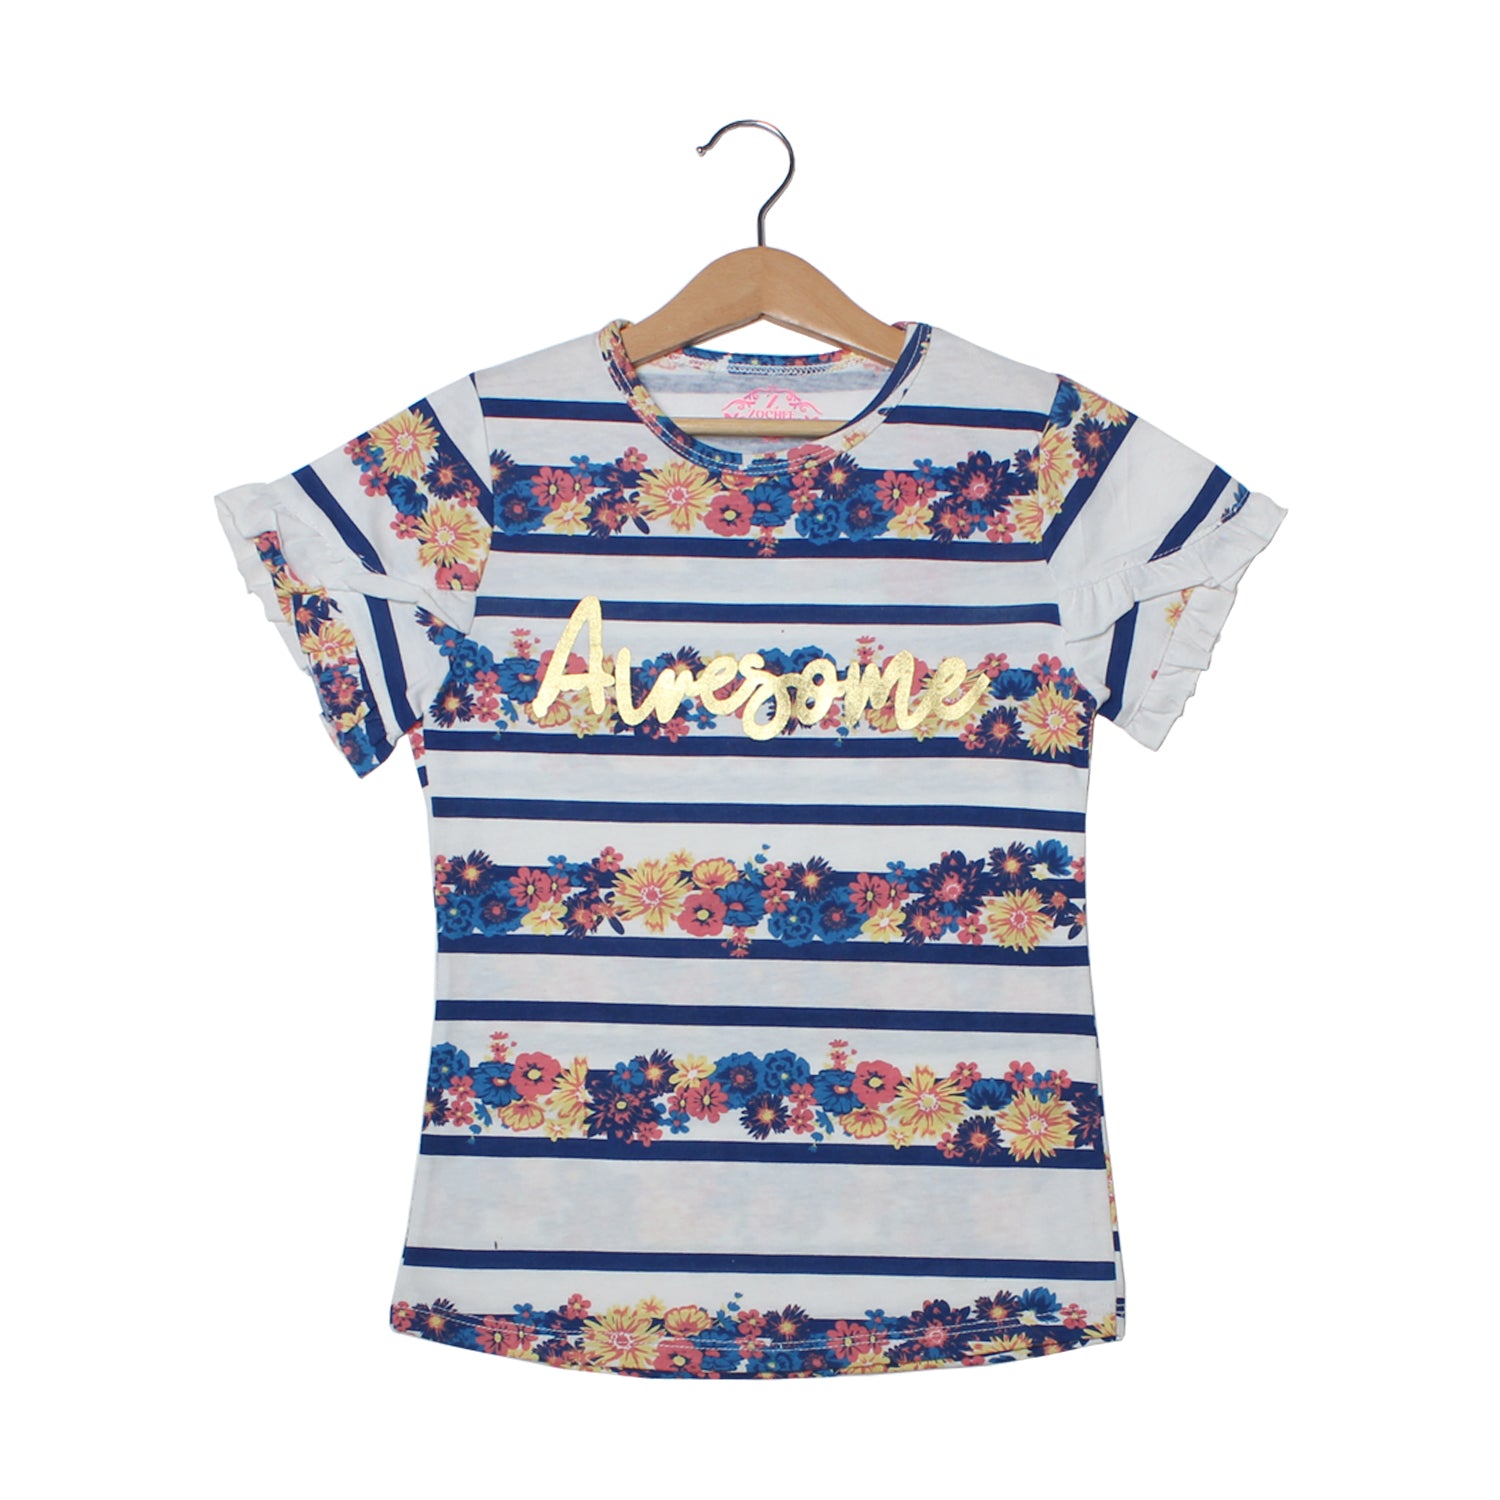 NEW WHITE WITH STRIPES AWESOME FLOWERS PRINTED T-SHIRT